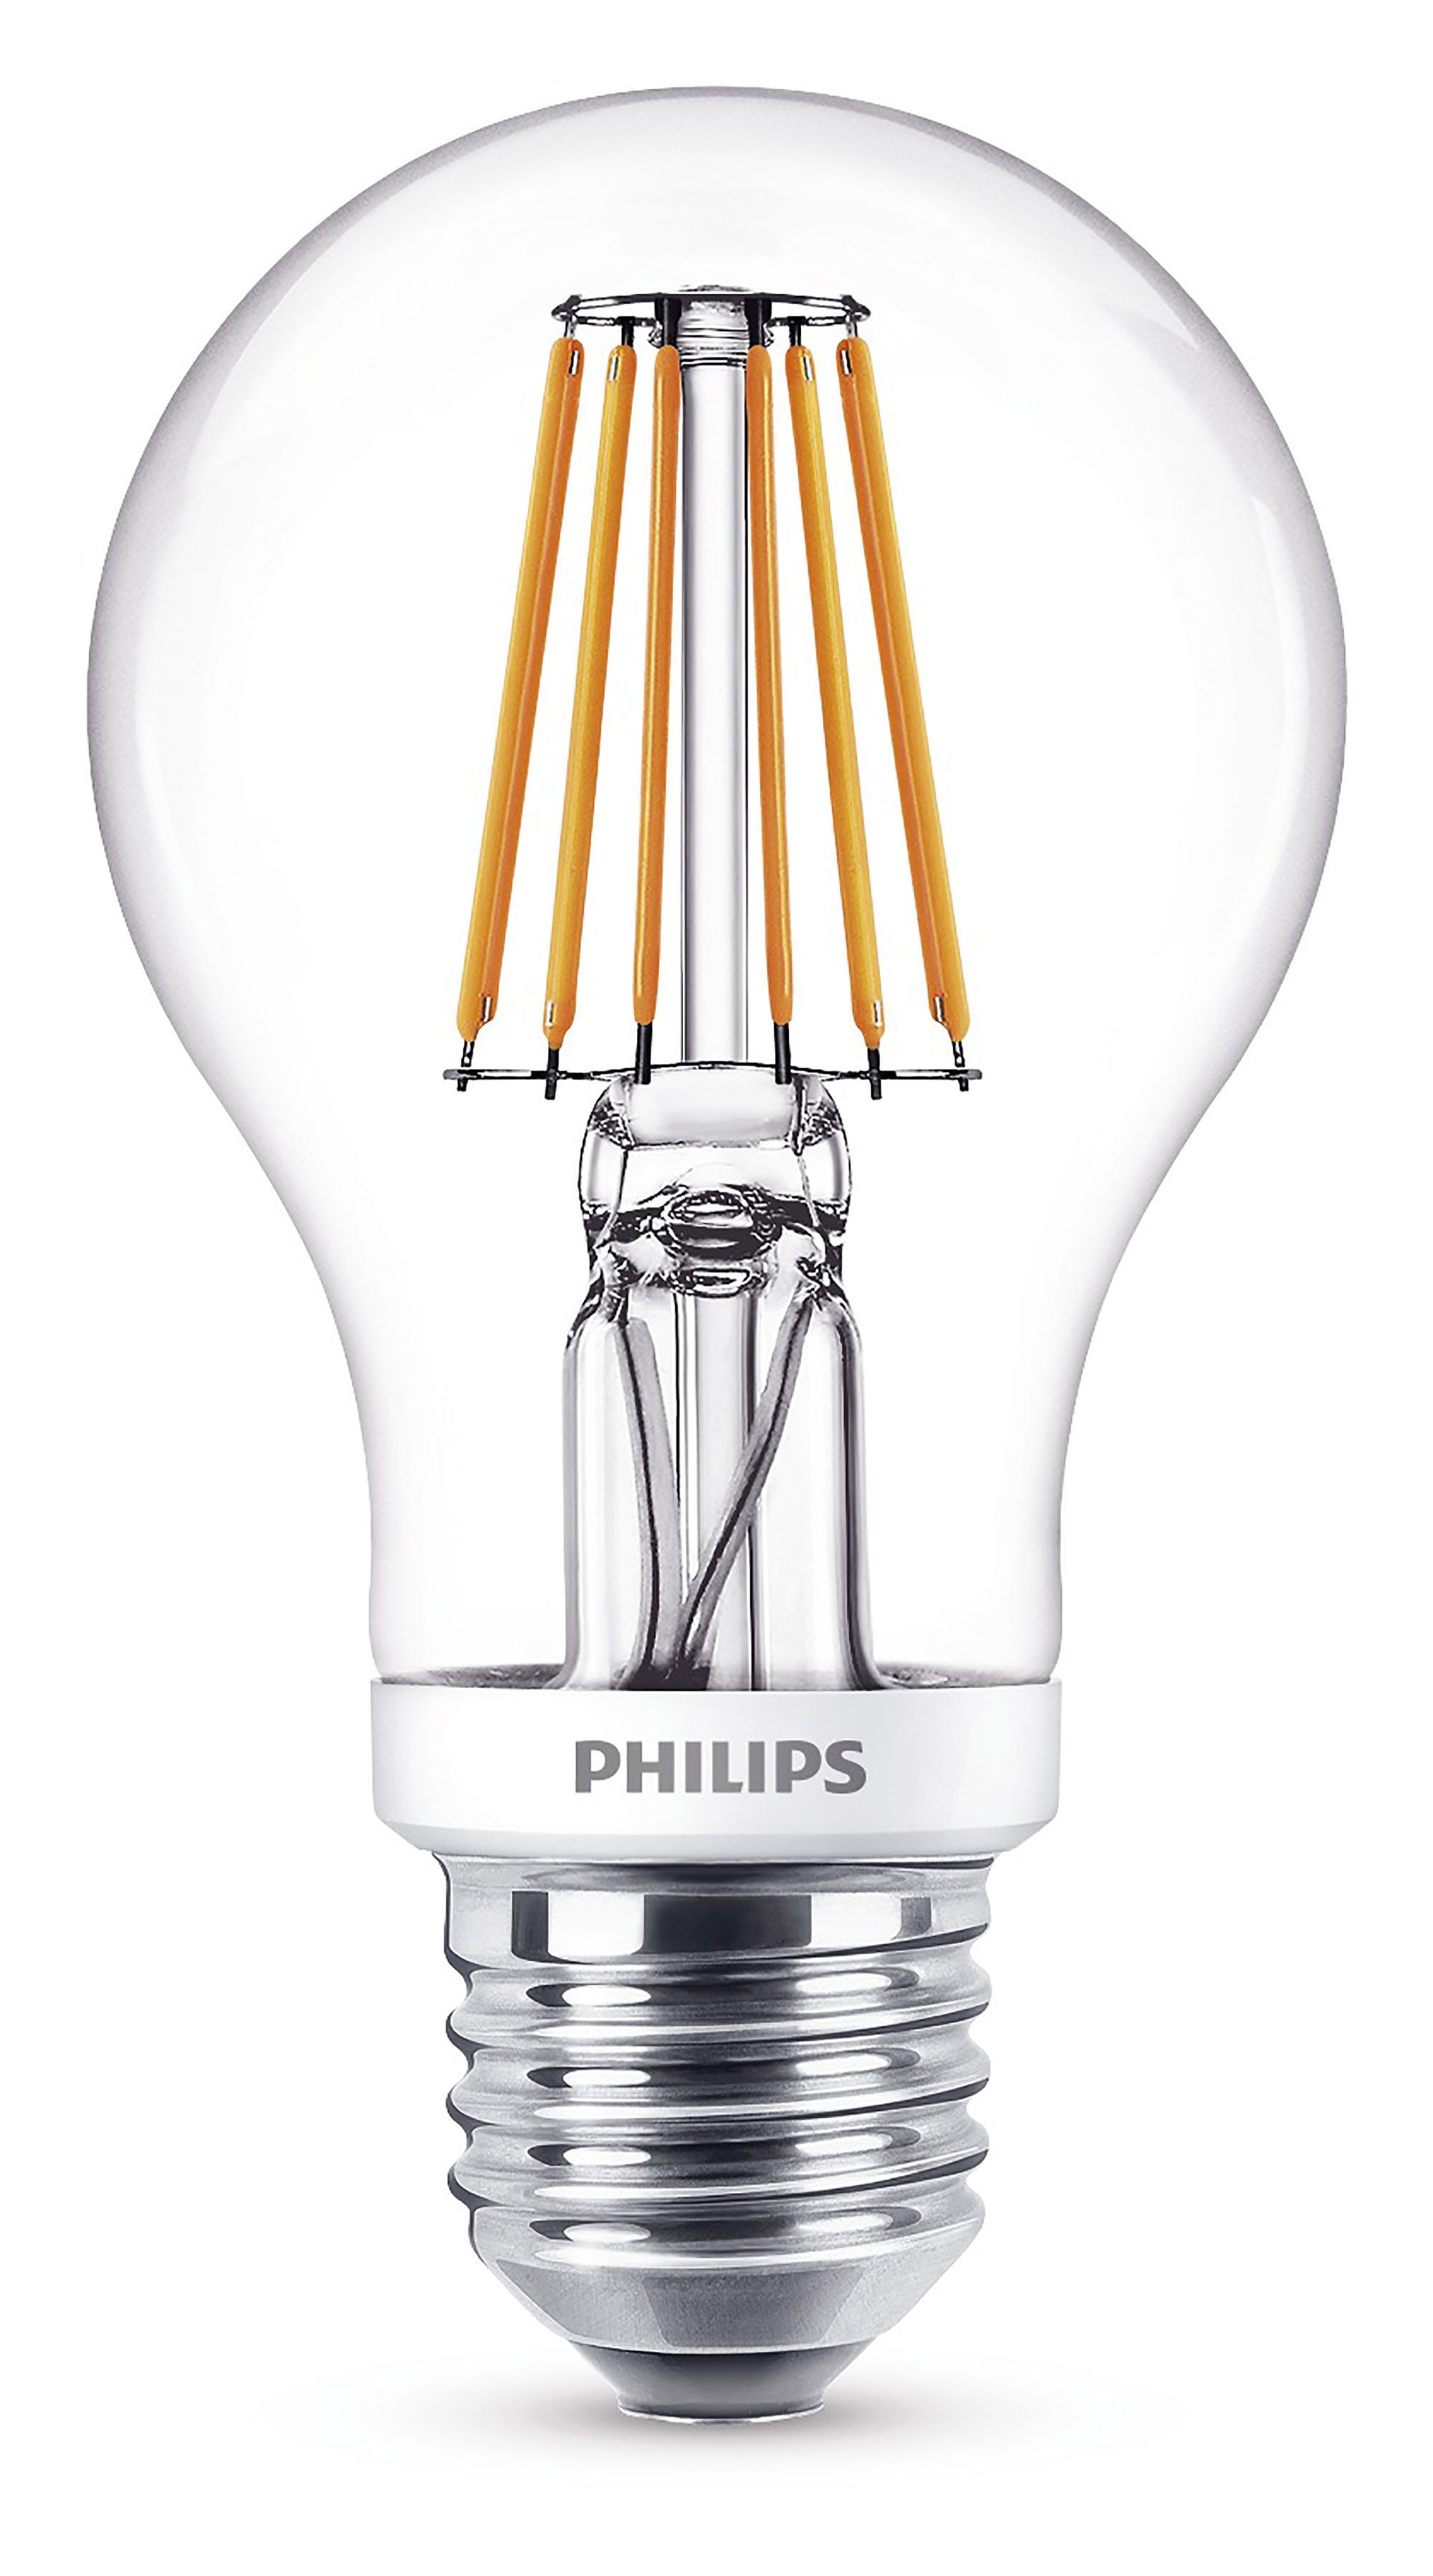 Philips E27 806lm LED Dimmable GLS Light Bulb | Departments | DIY at B&Q